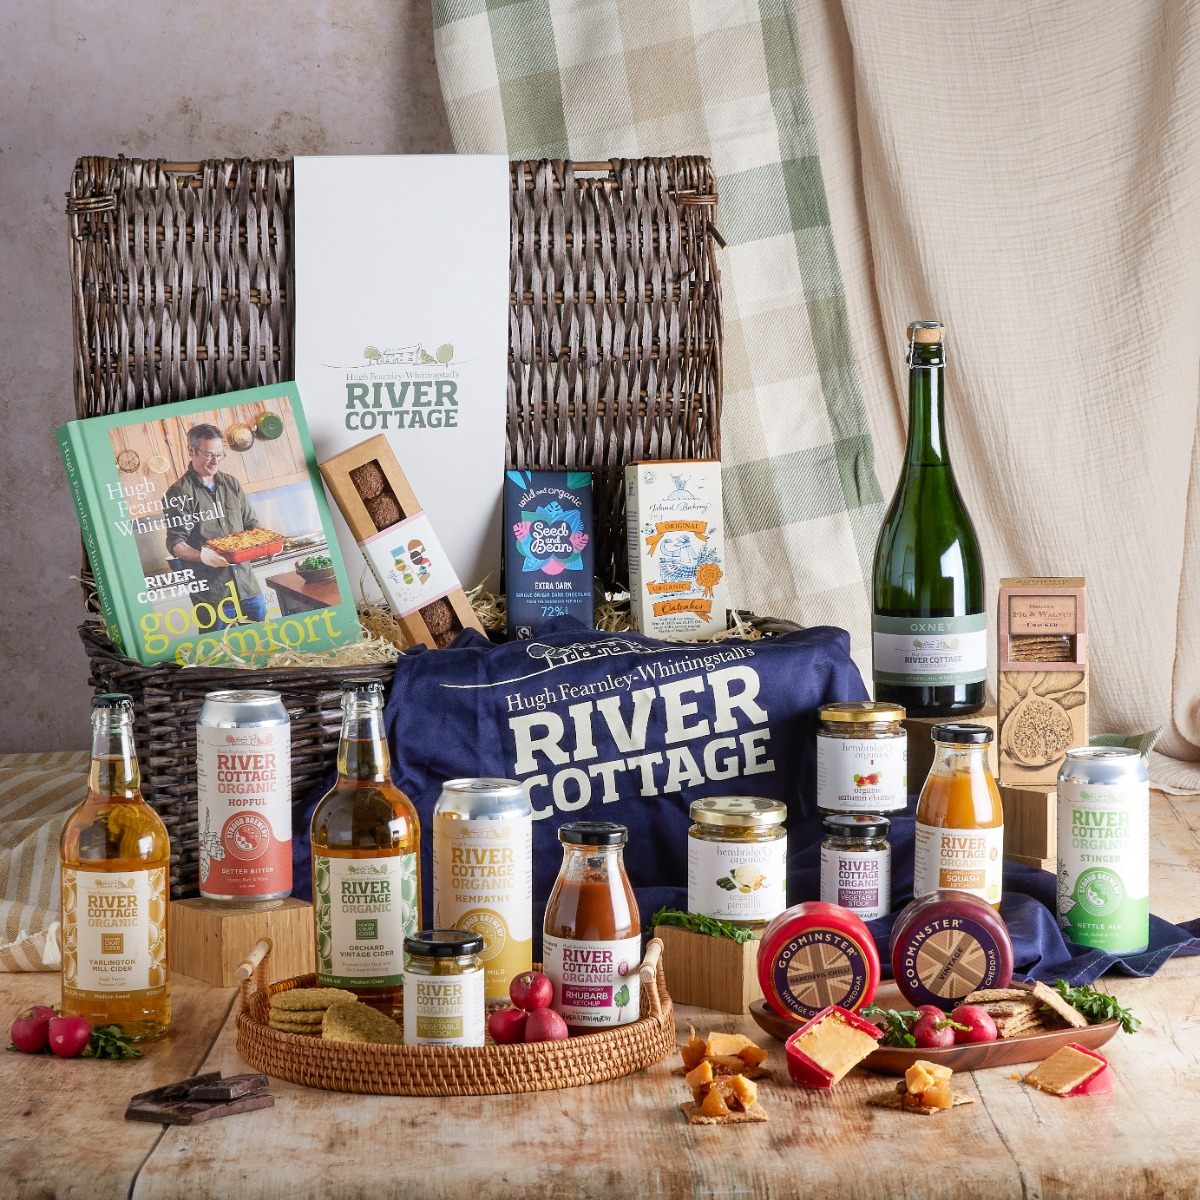 River Cottage Hamper with contents on display